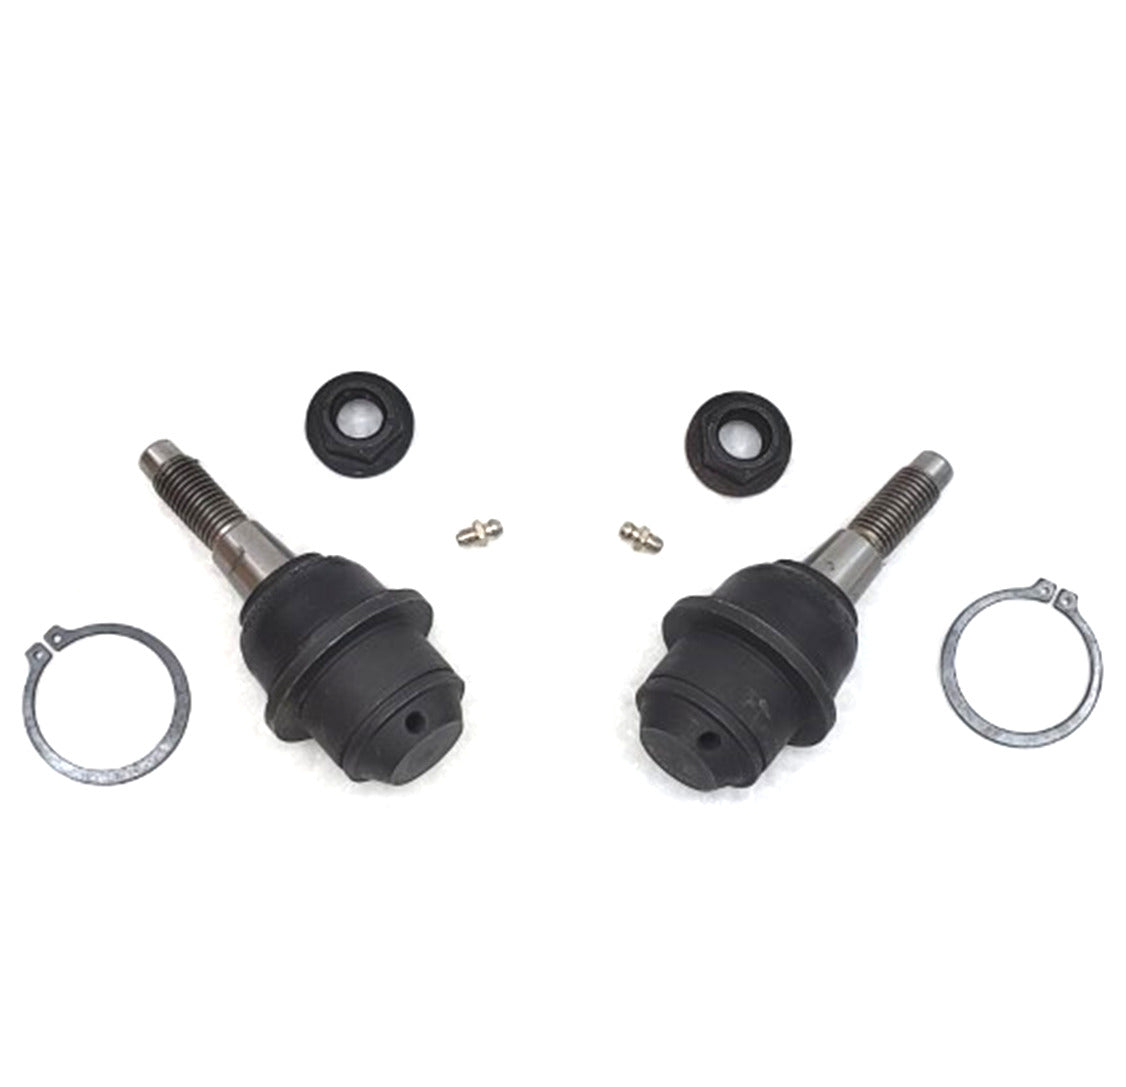 XRF Lower Ball Joints Suspension Kit for 2014-2018 Chevrolet, GMC, Cadillac 2WD, 4x4